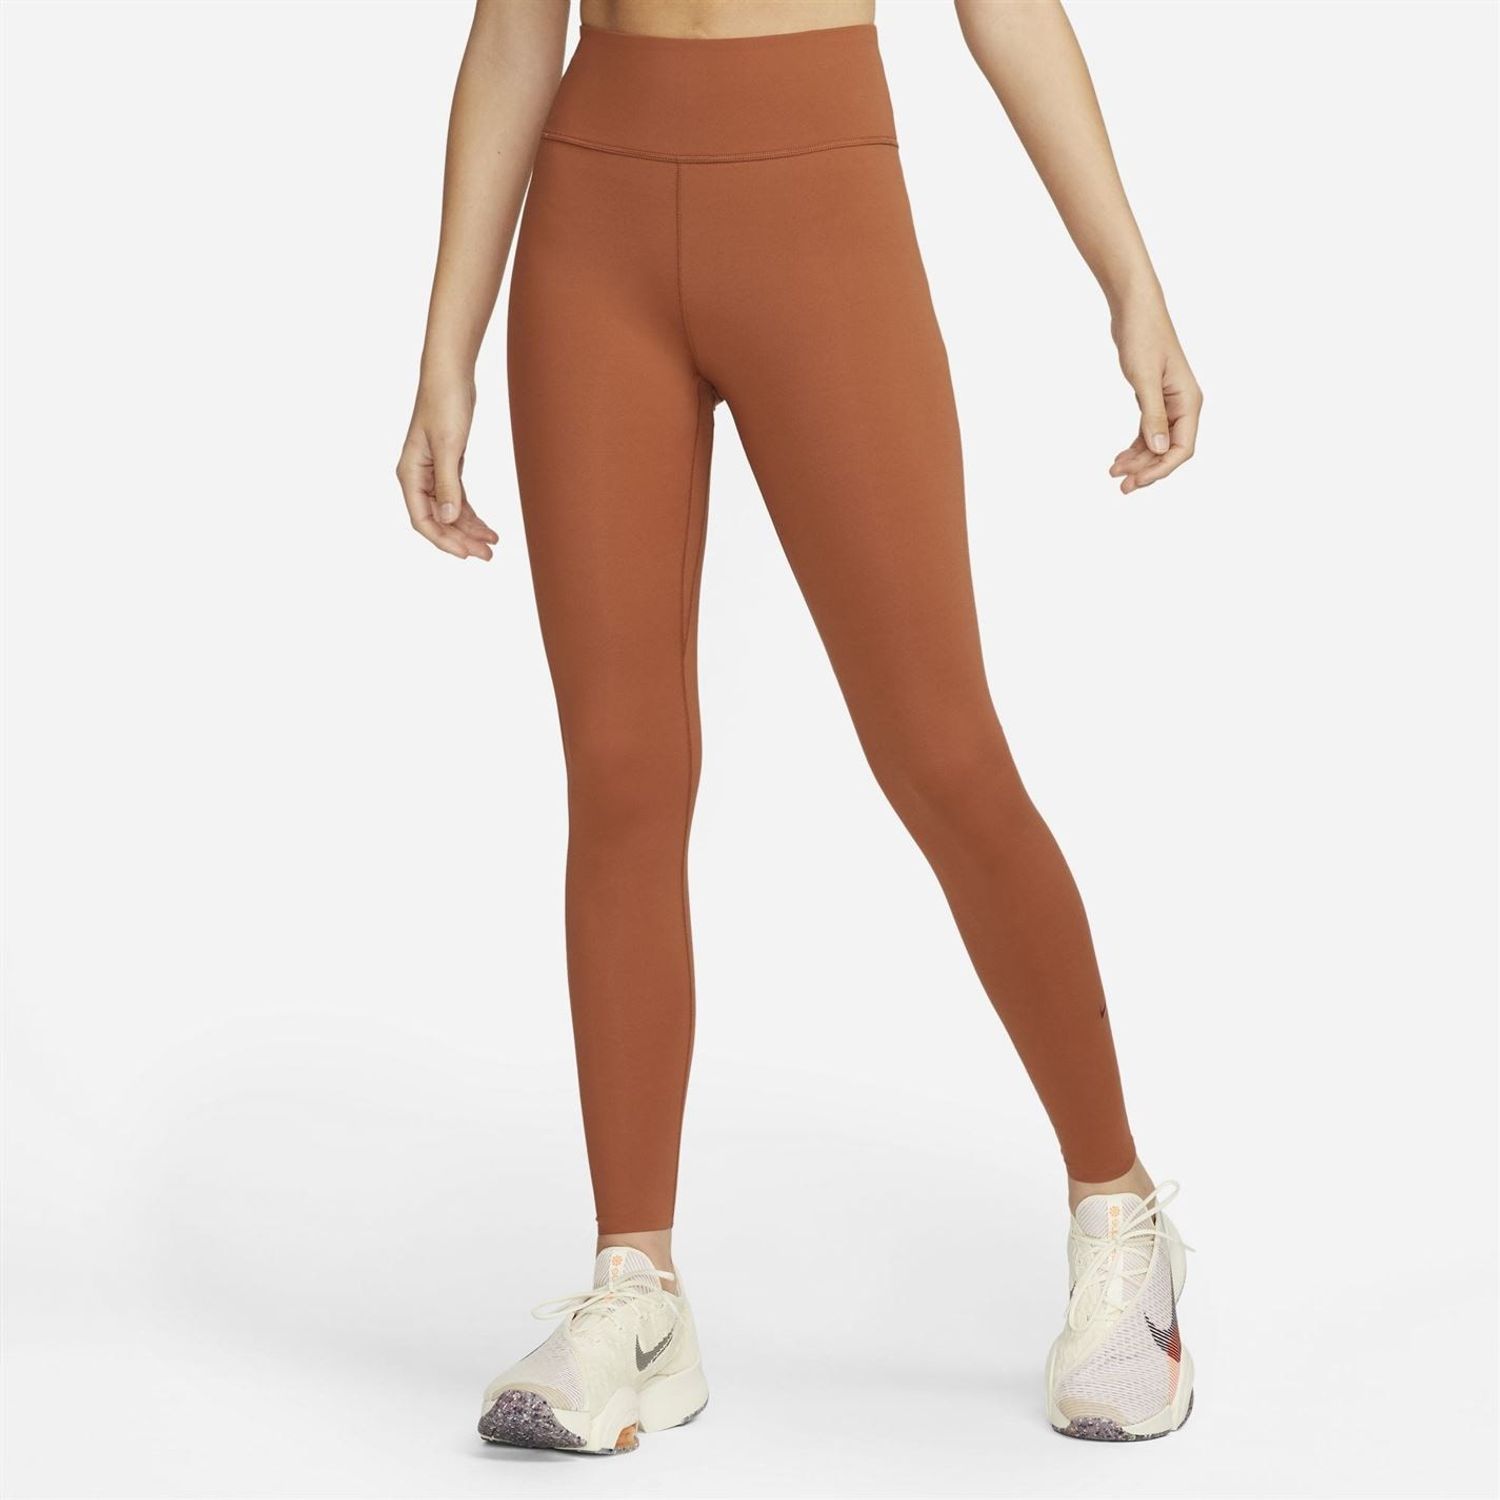 Orange Nike One Luxe Tights Womens - Get The Label